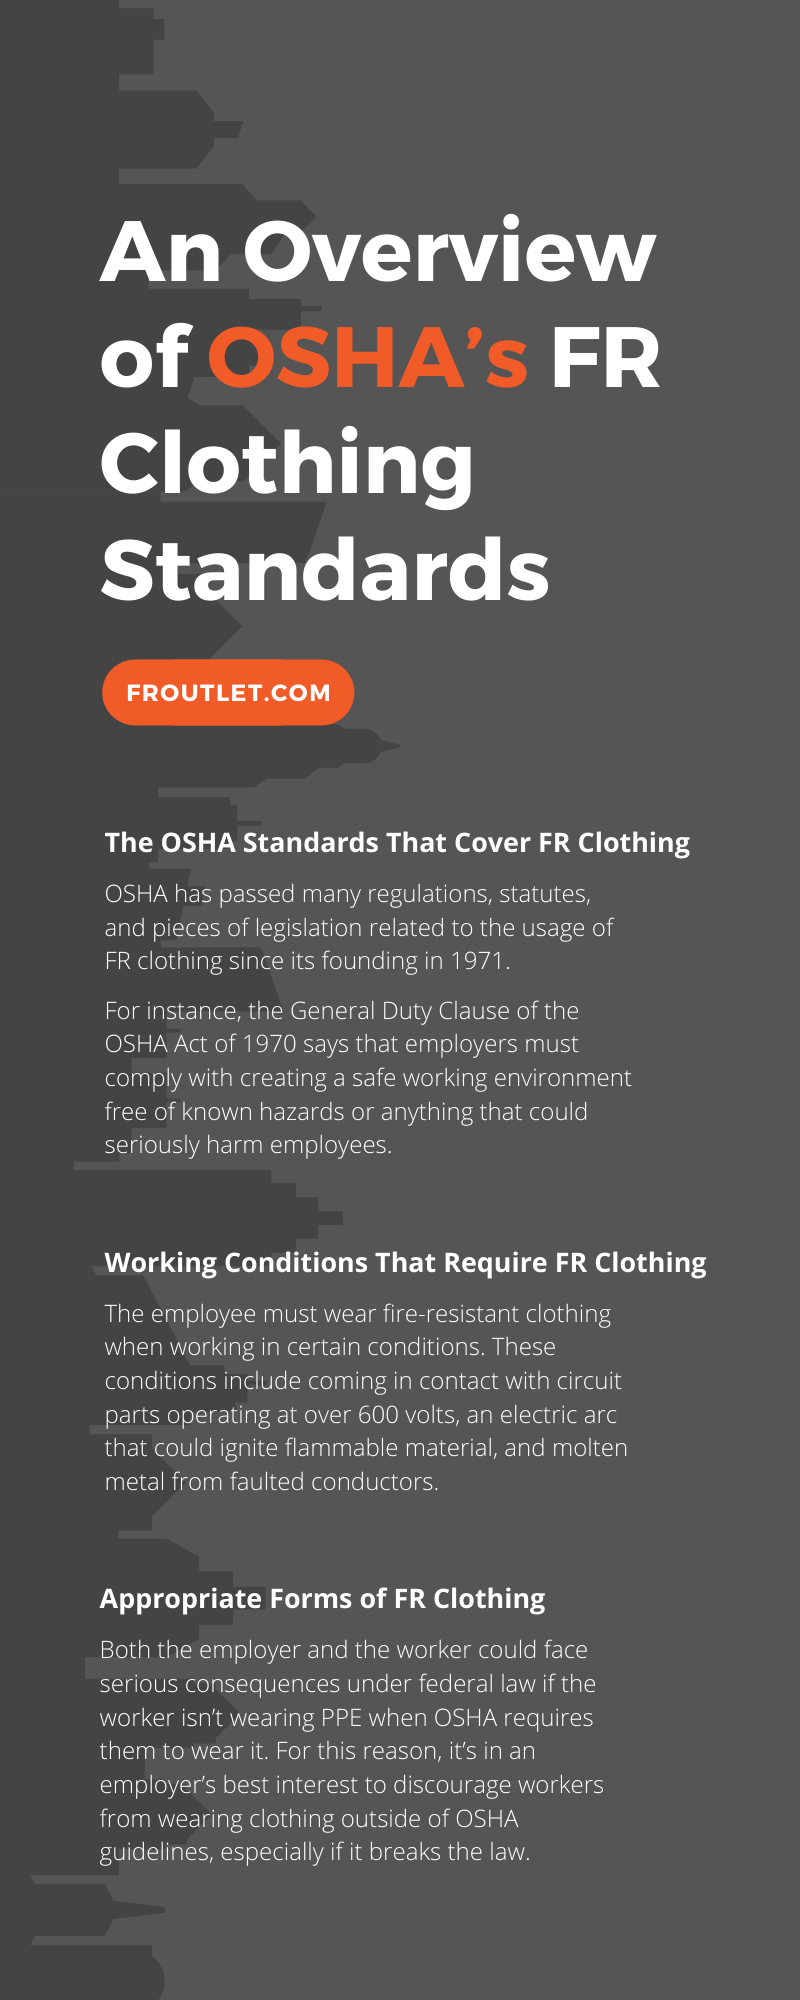 An Overview of OSHA’s FR Clothing Standards